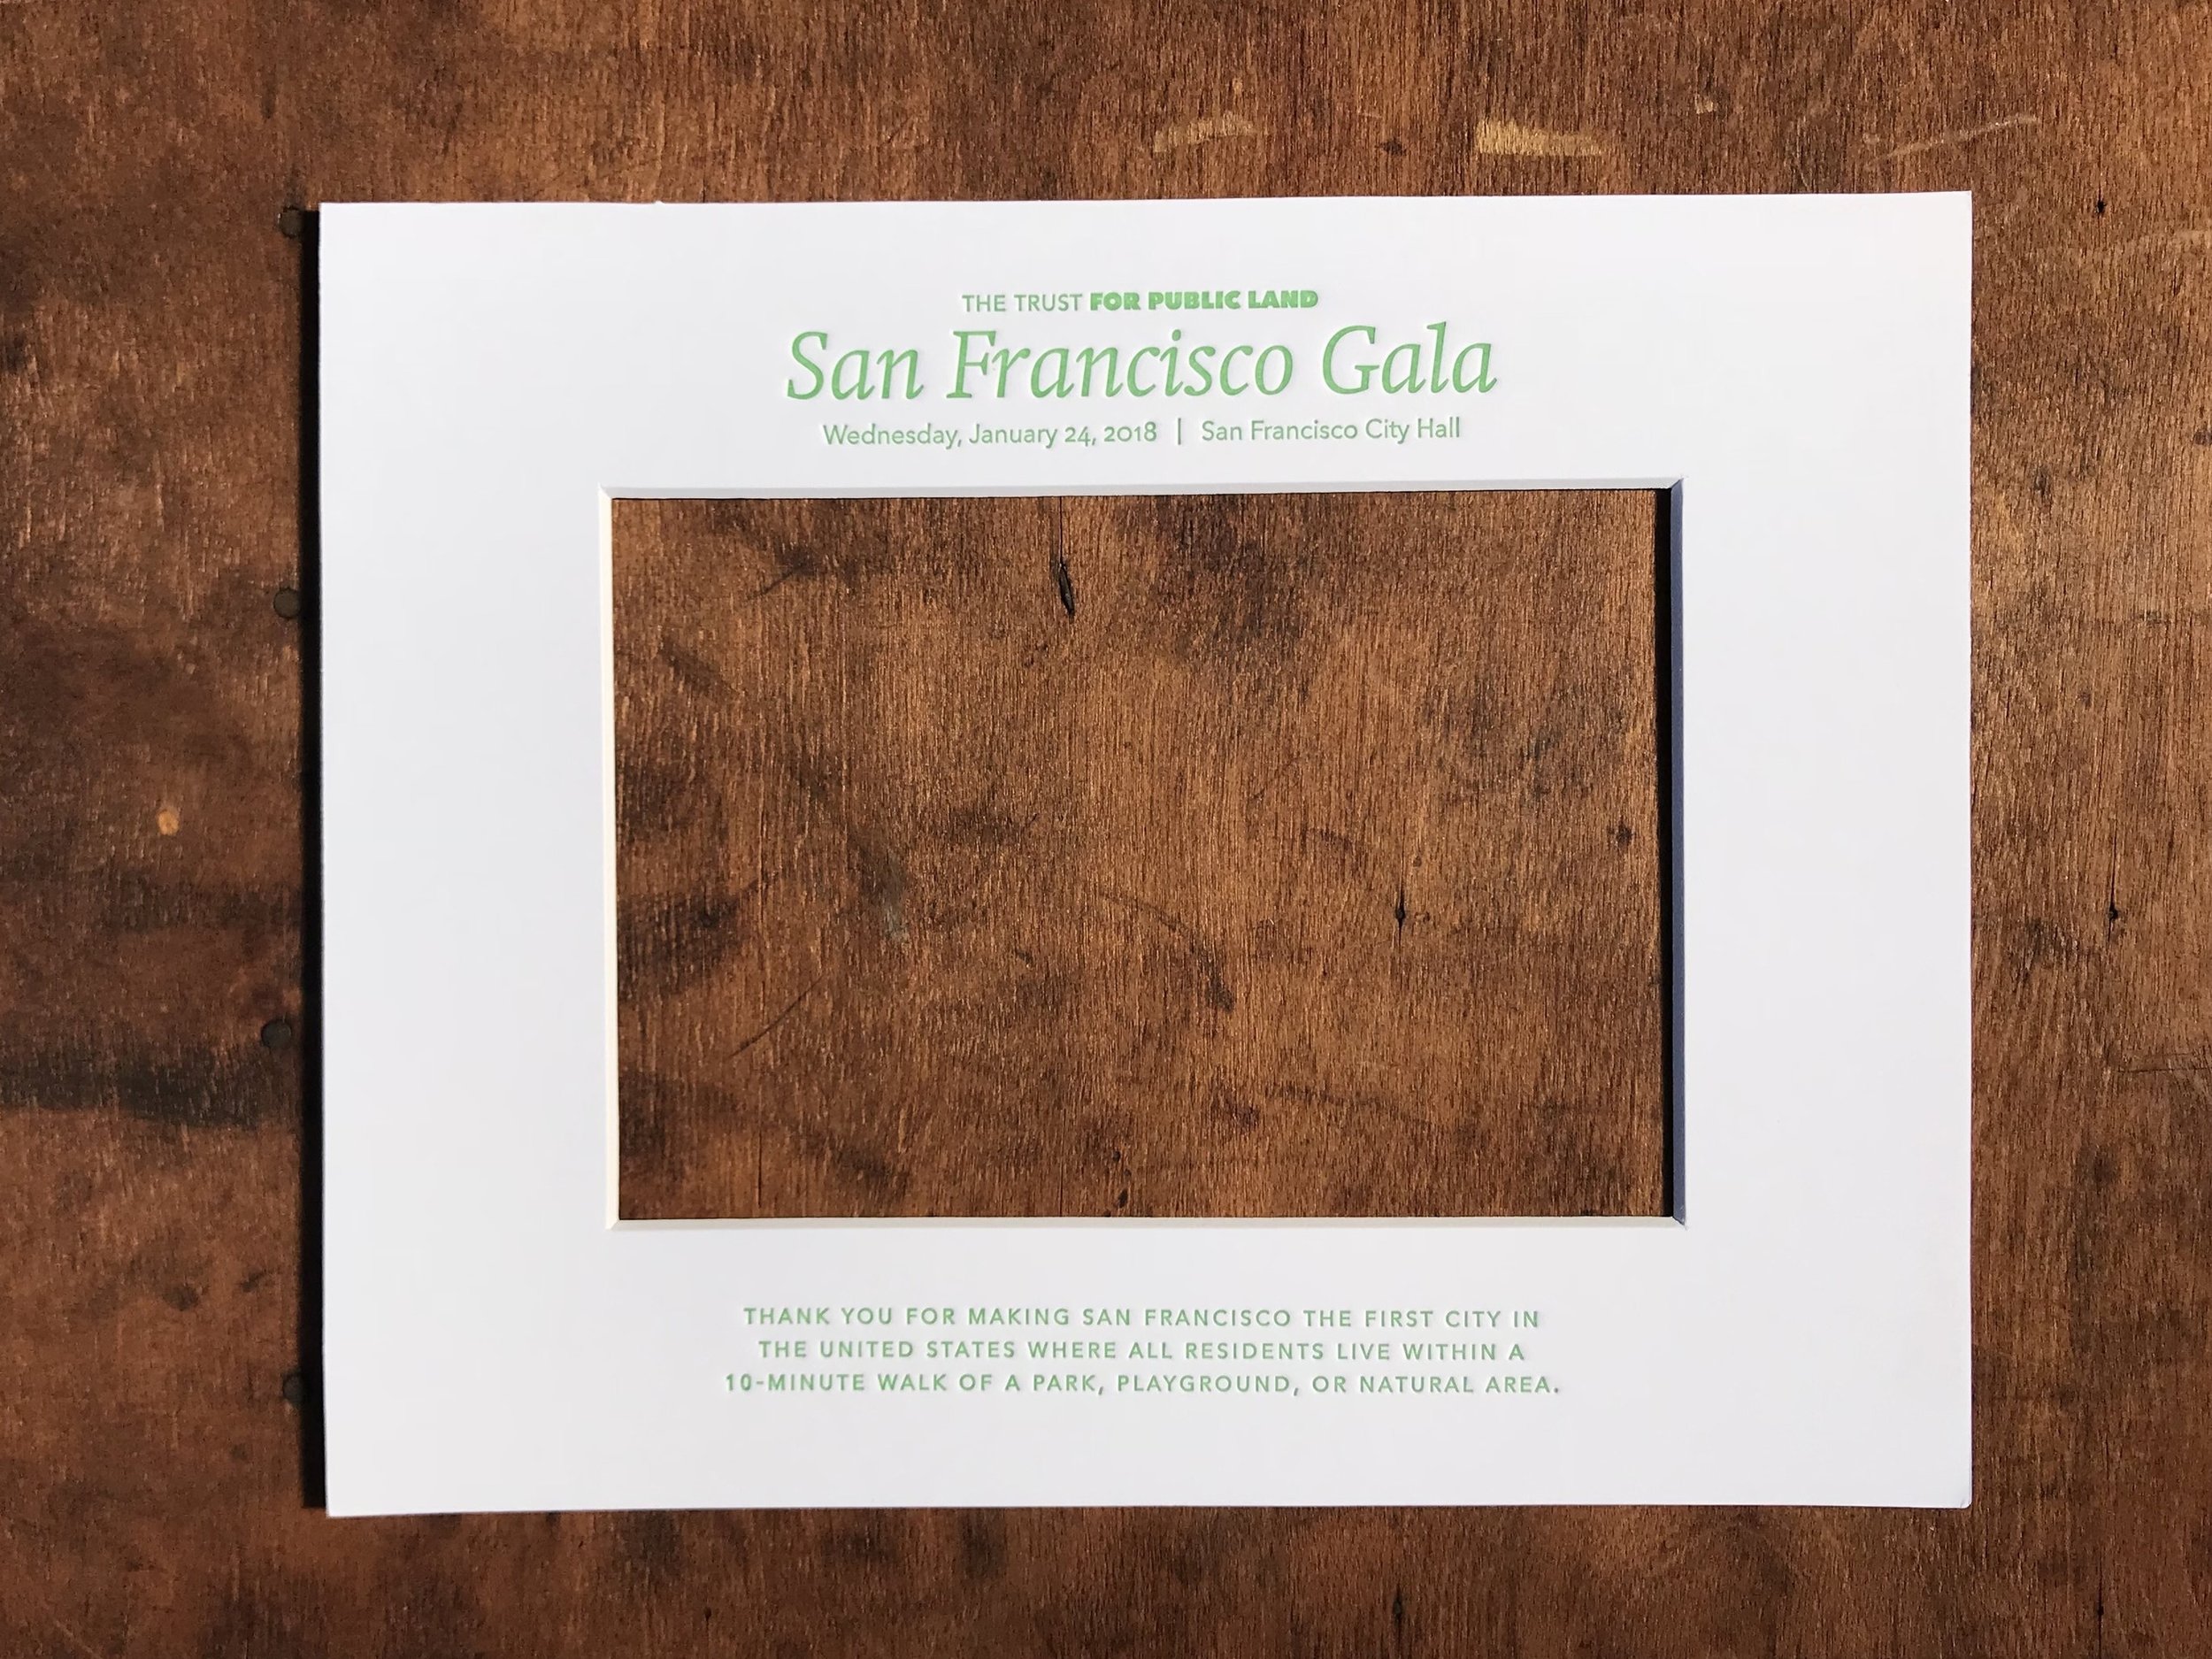 Custom Photo Mats with Text: Personalize Your Photos and Frames —  Typothecary Letterpress